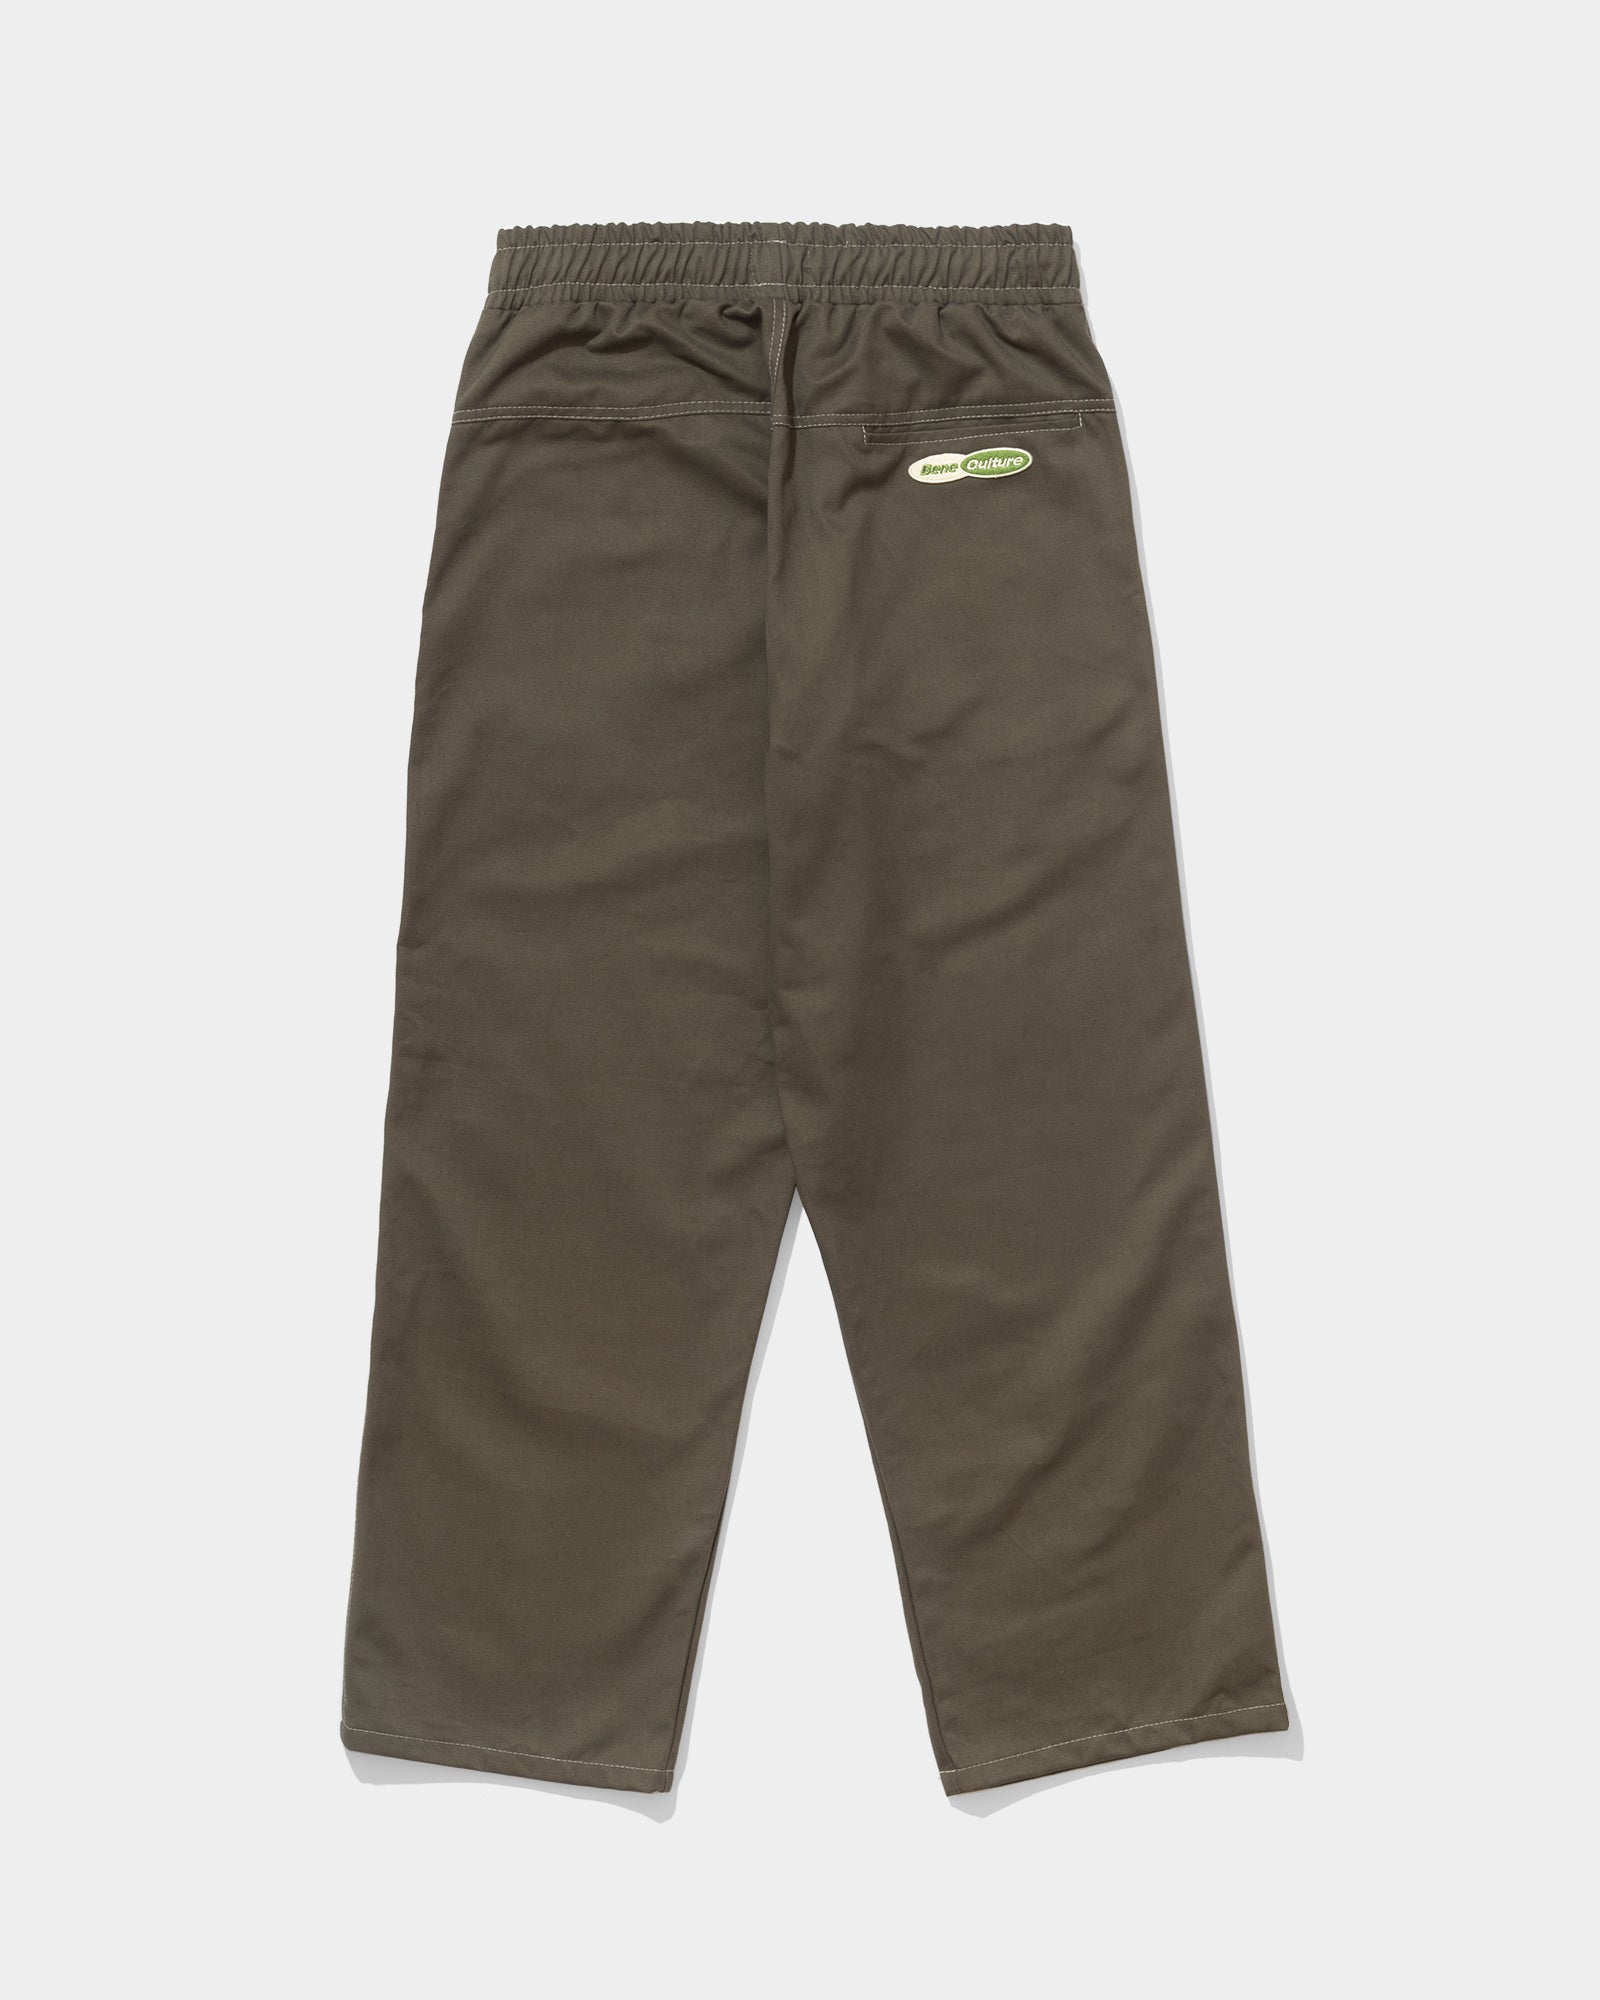 All-Rounder Pants (Green)